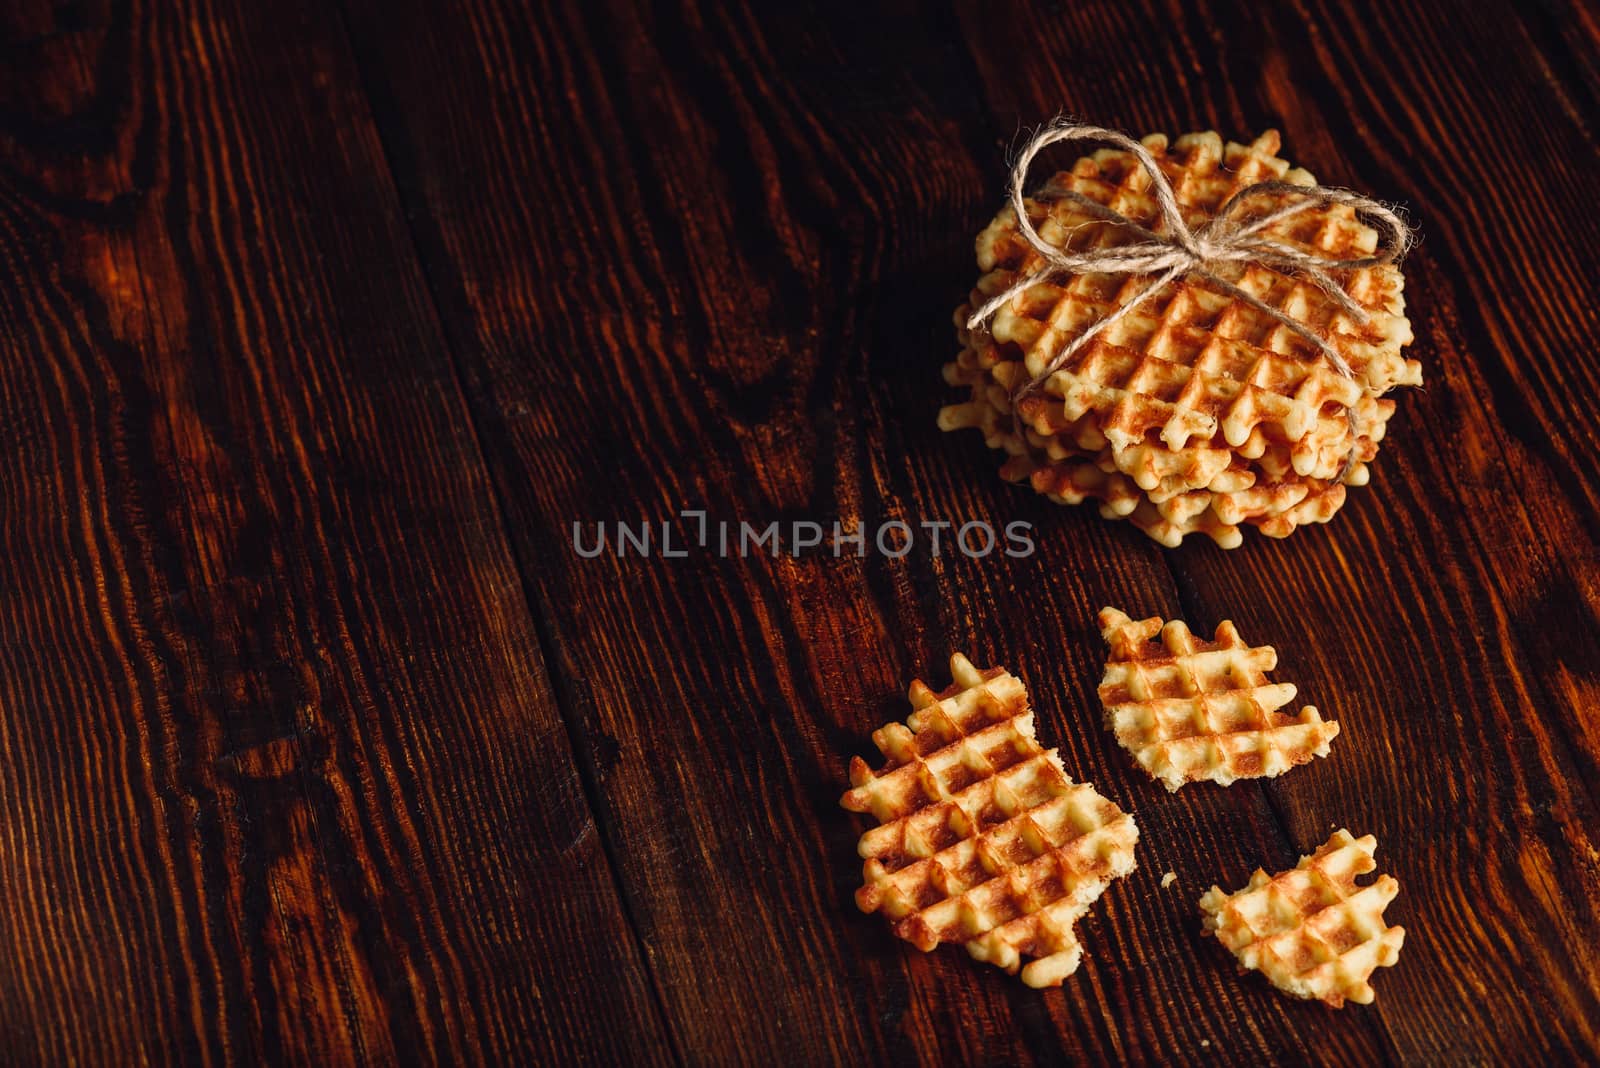 Belgian Waffles on Wooden Surface with Copy Space on the Left.